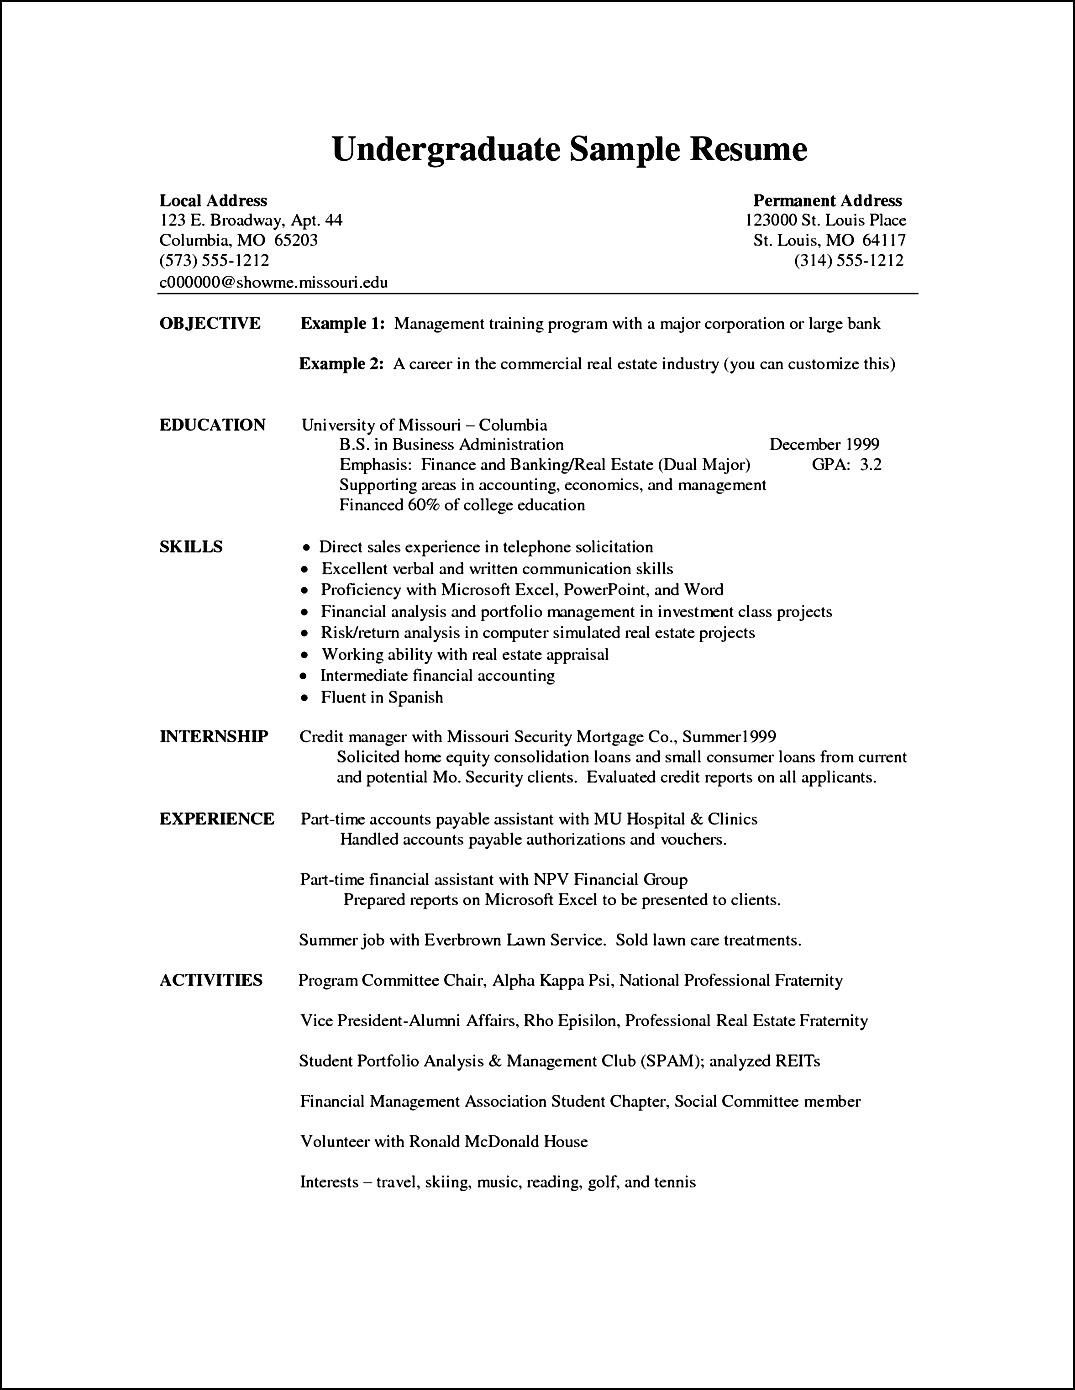 Resume Format Undergraduate Cv Examples Resume Format intended for measurements 1075 X 1390